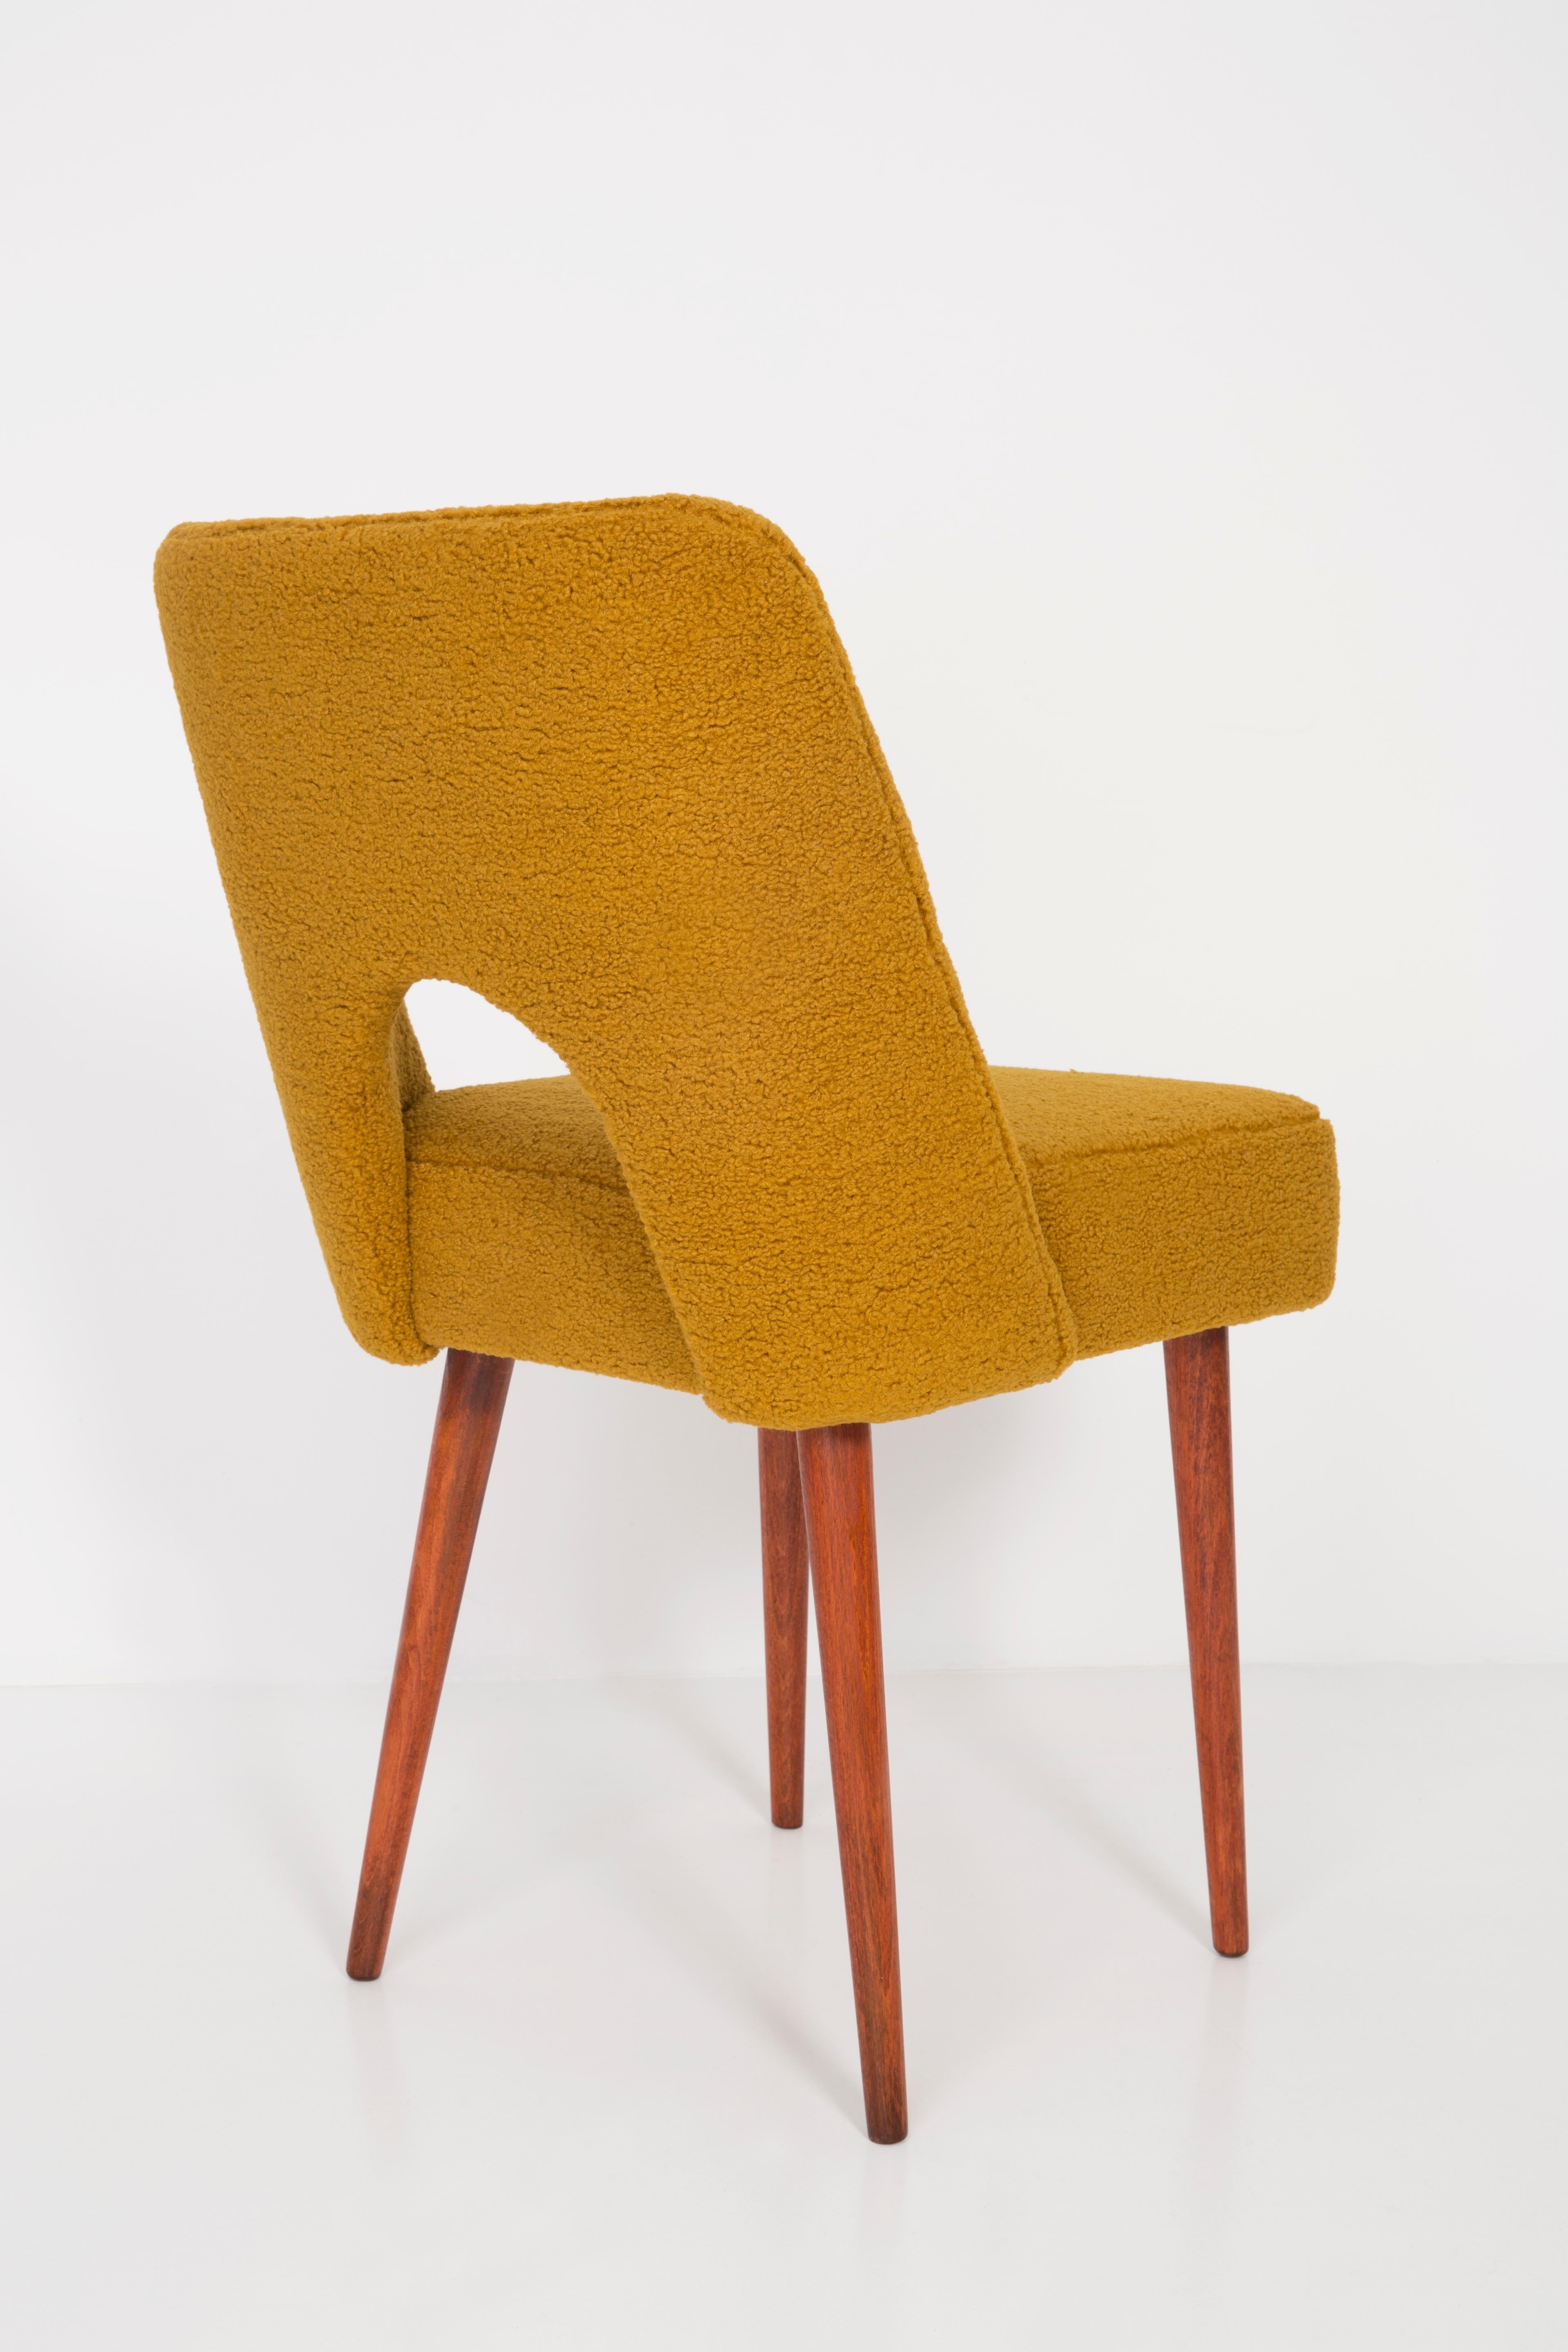 Set of Twelve Yellow Ochre Boucle 'Shell' Chairs, 1960s For Sale 4